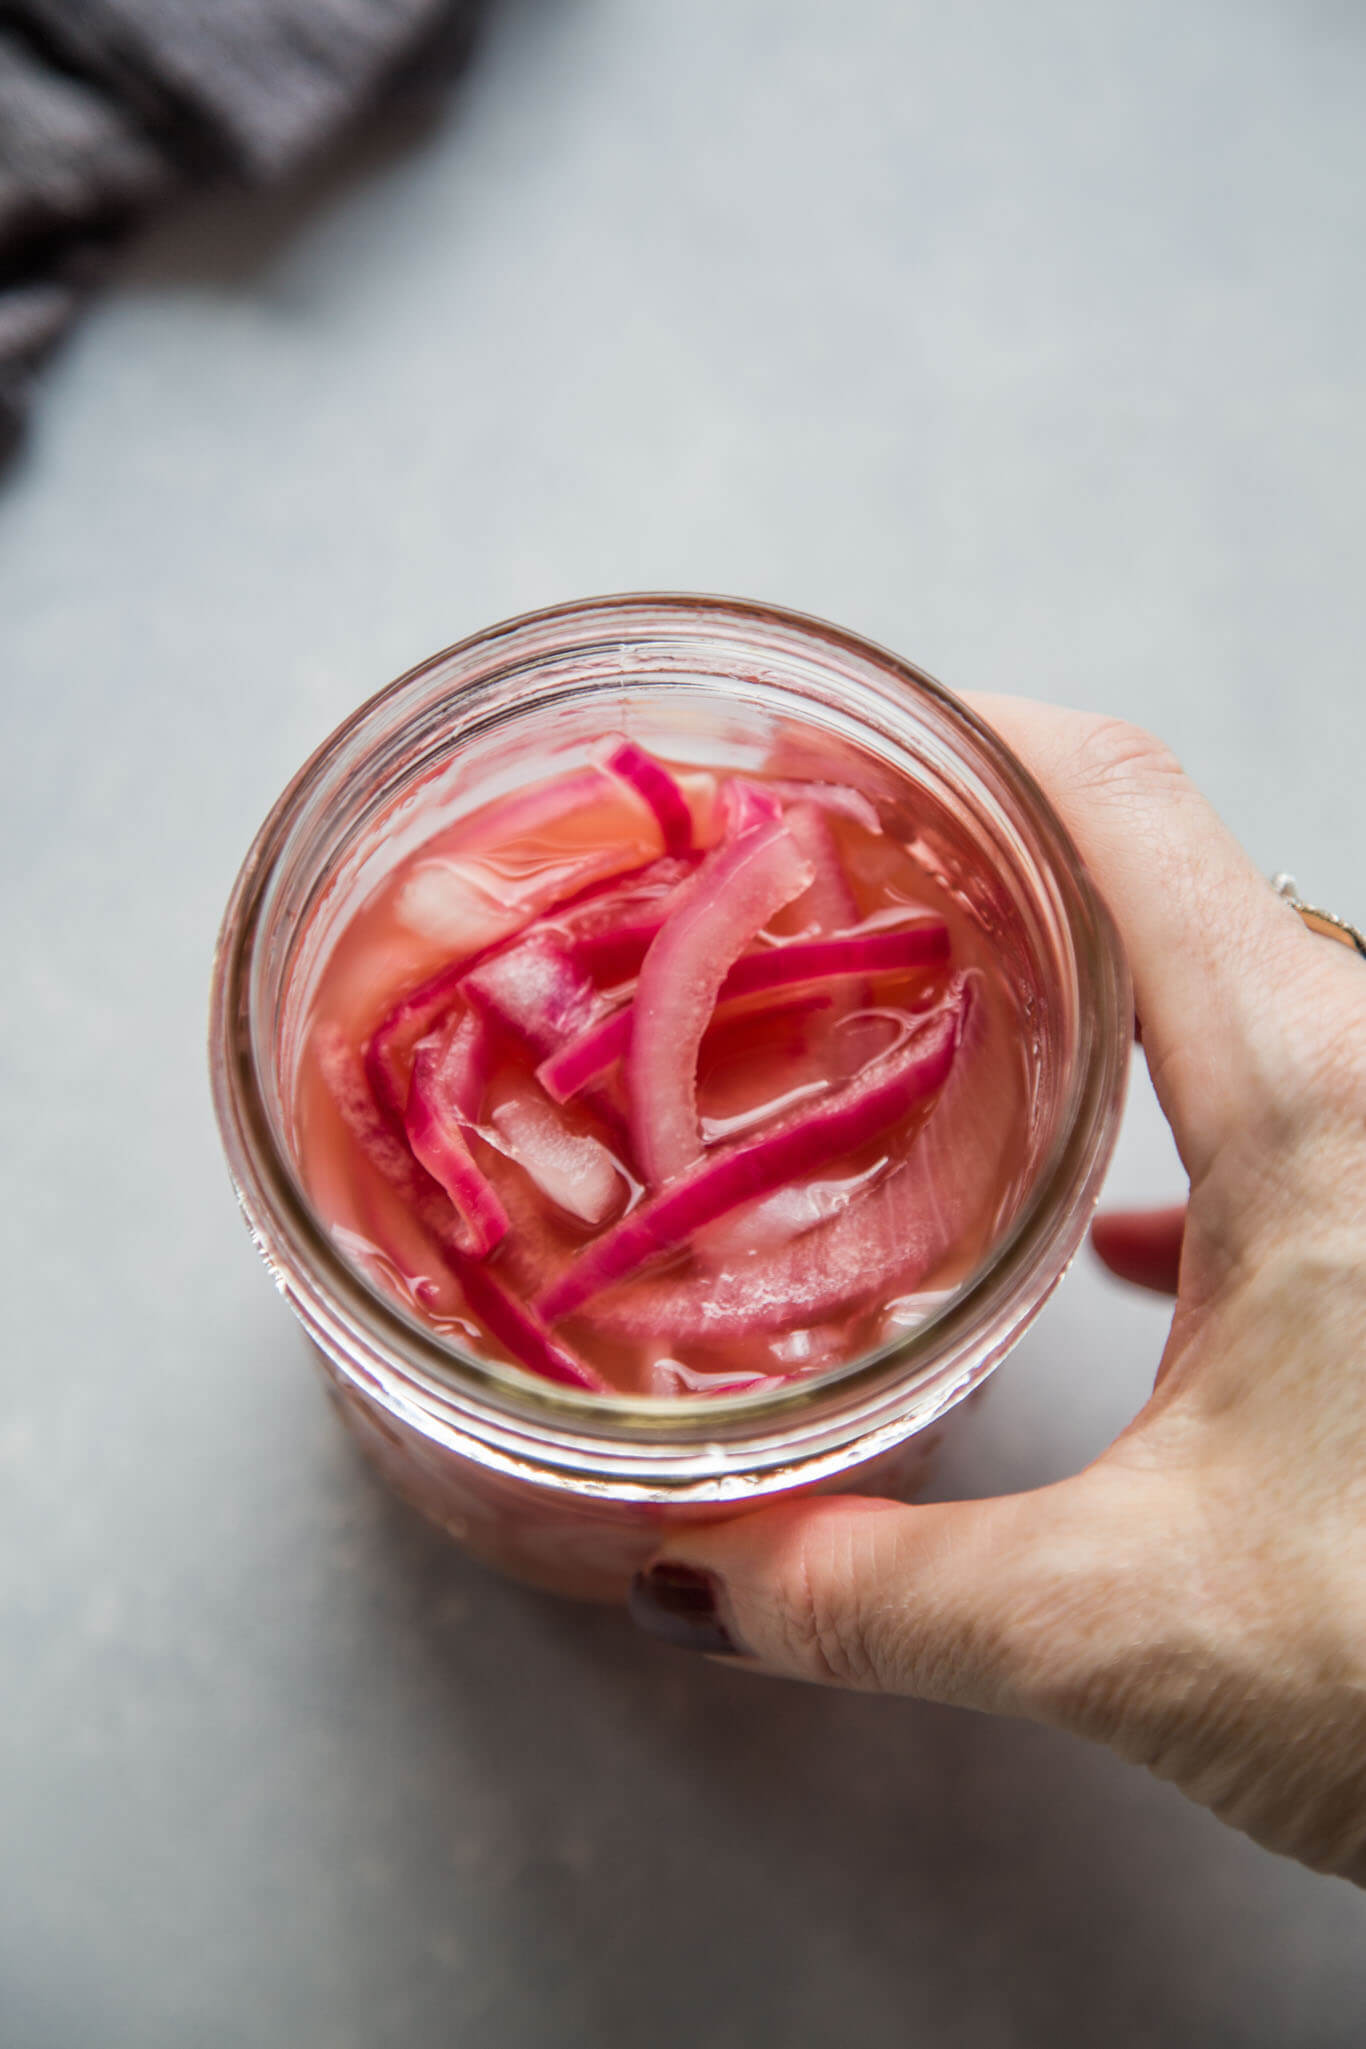 Hand reaching for jar of quick pickled onions.